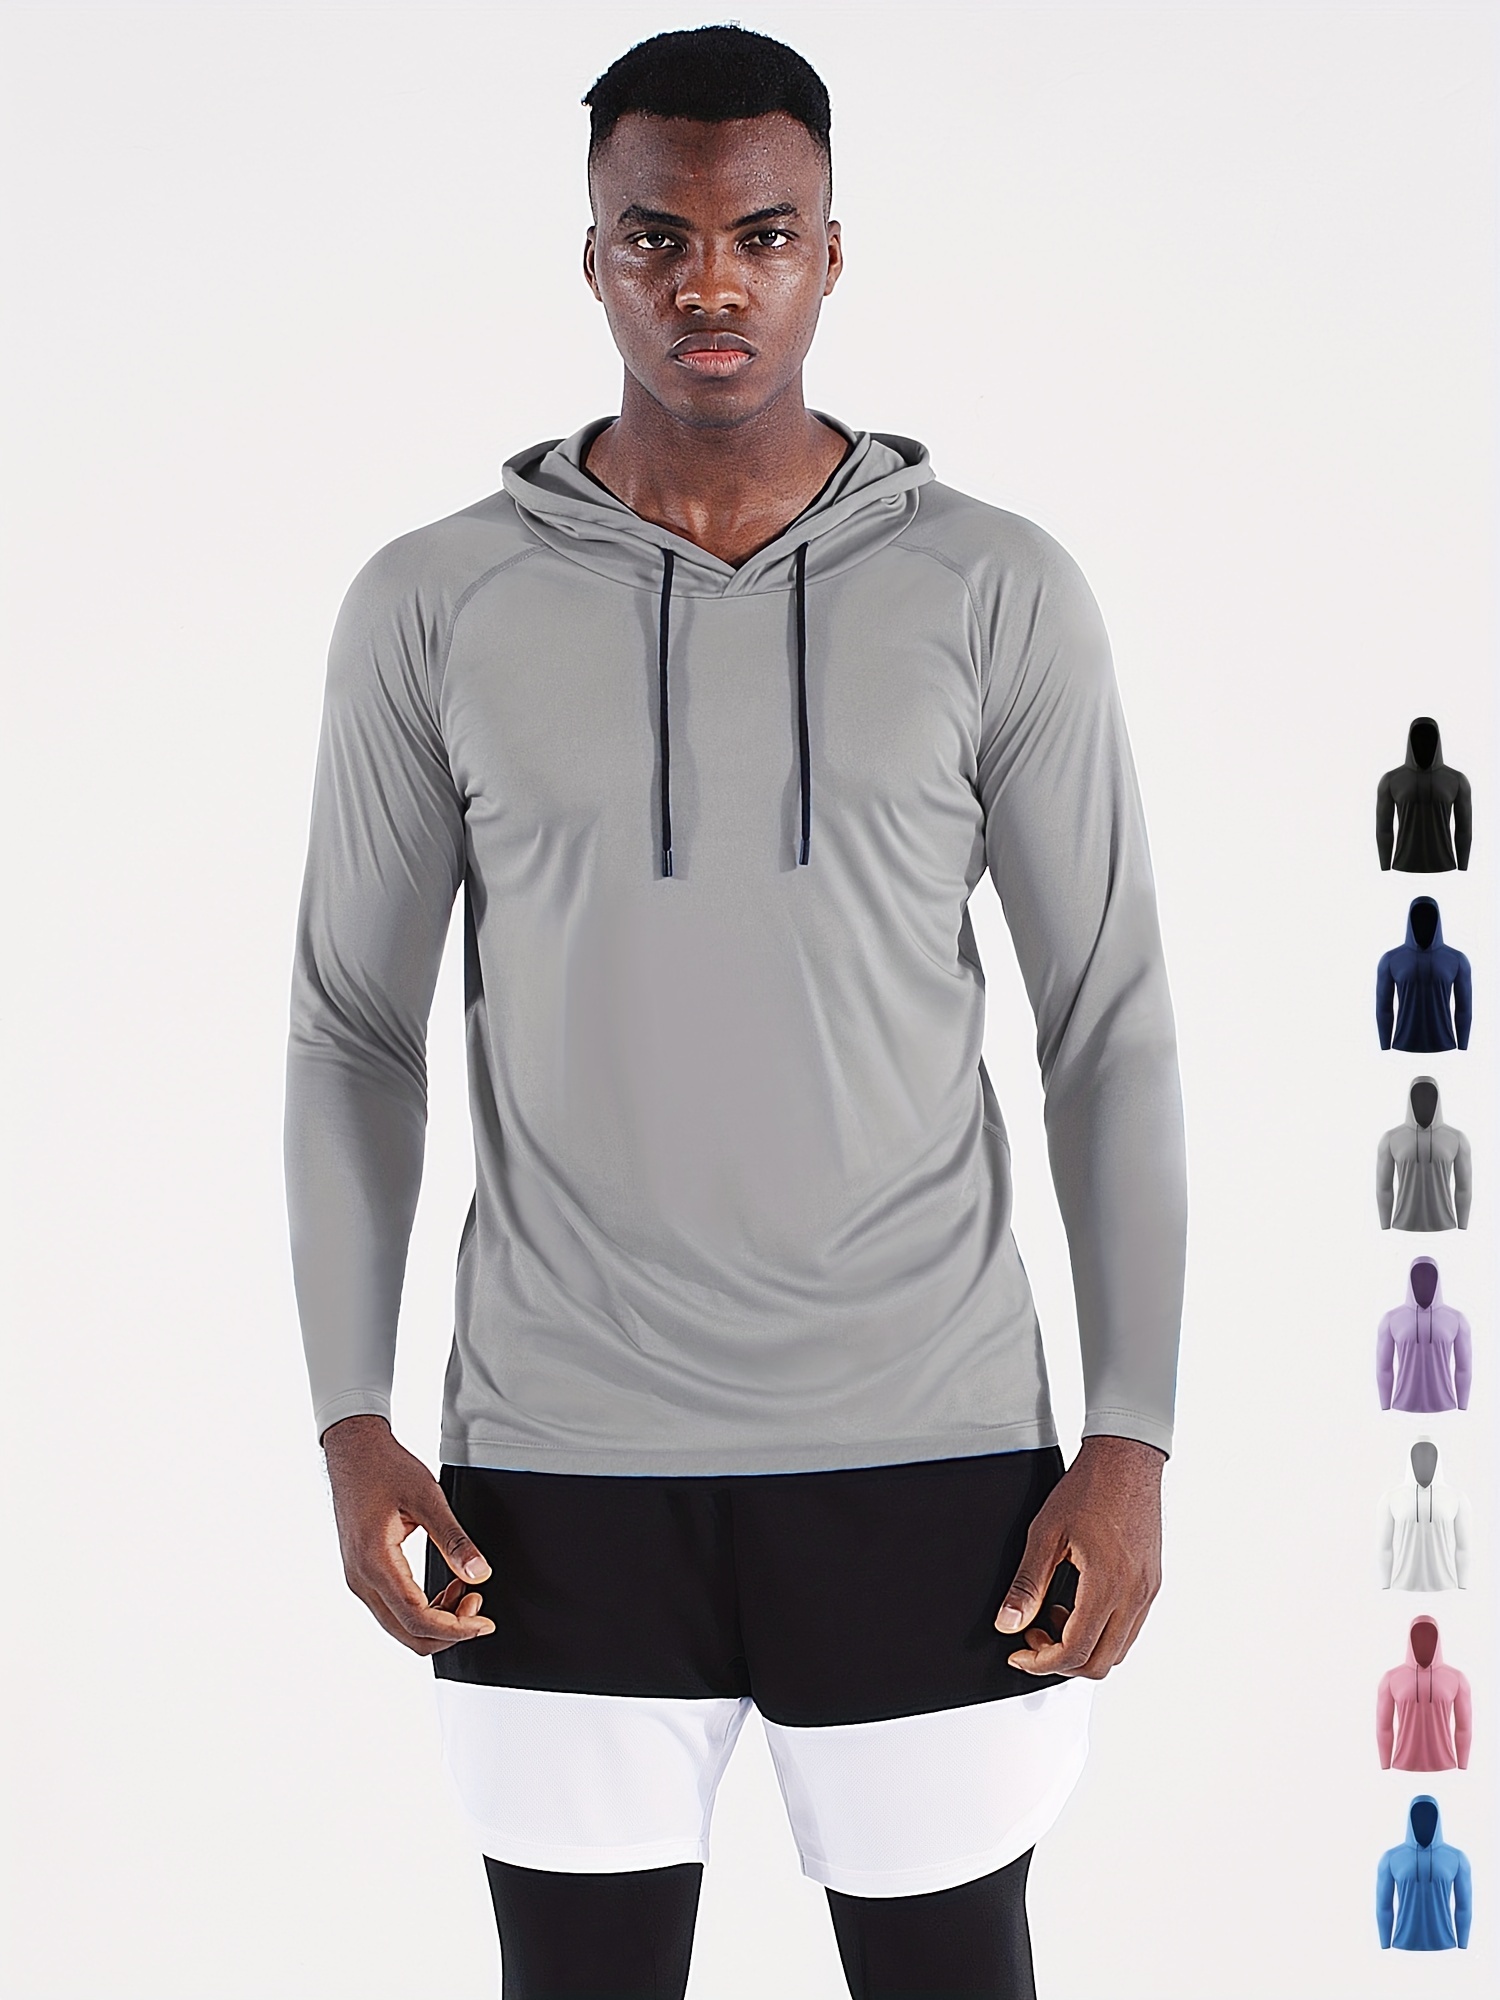 UPF 50+ Men's Hooded Athletic Shirt For Sun Protection During Outdoor  Activities